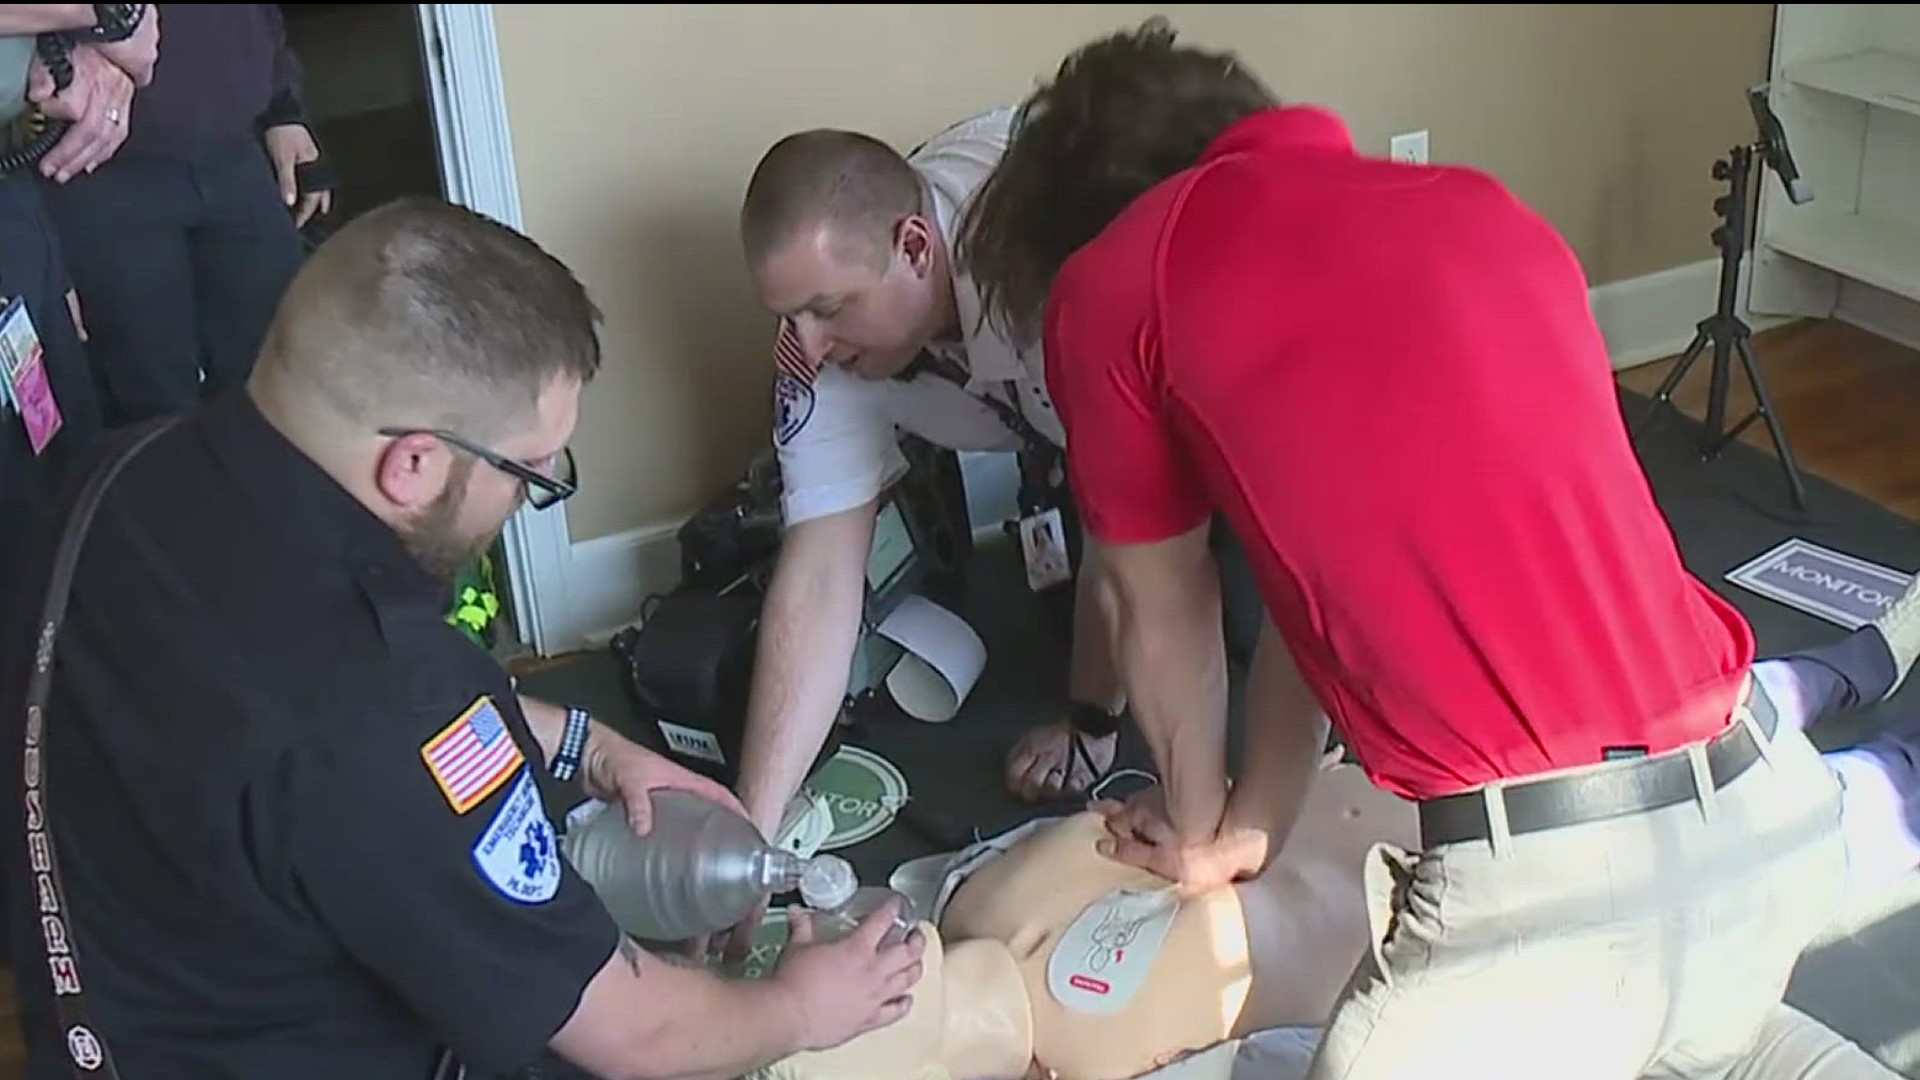 FOX43's Tyler Hatfield went to Cumberland Goodwill Emergency Medical Services to learn what it takes to be a part of their team.